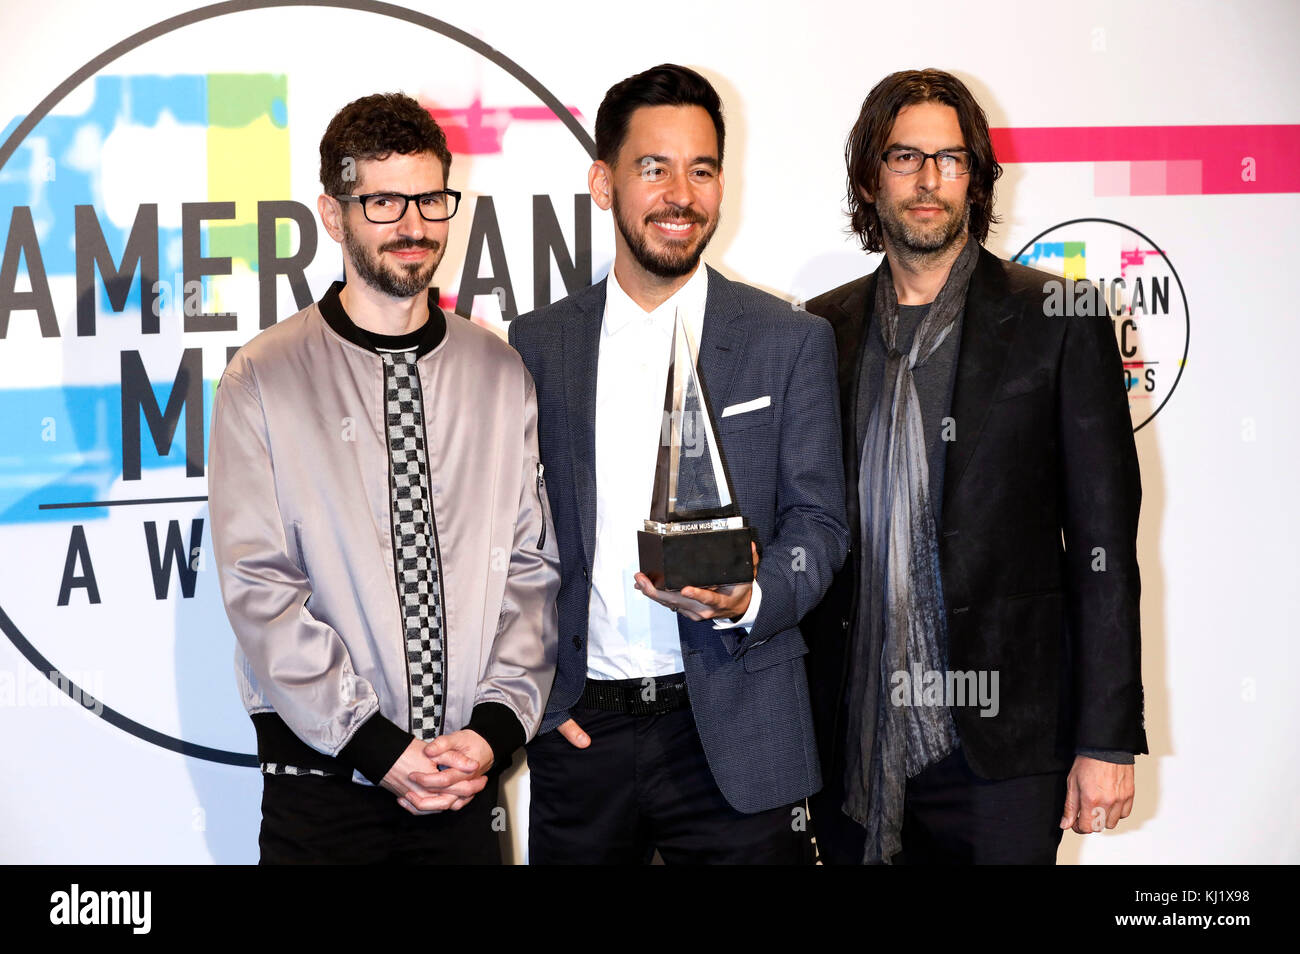 Brad Delson, Mike Shinoda and Rob Bourdon (Linkin Park) attend the 2017 American Music Awards at Microsoft Theater on November 19, 2017 in Los Angeles, California. Stock Photo